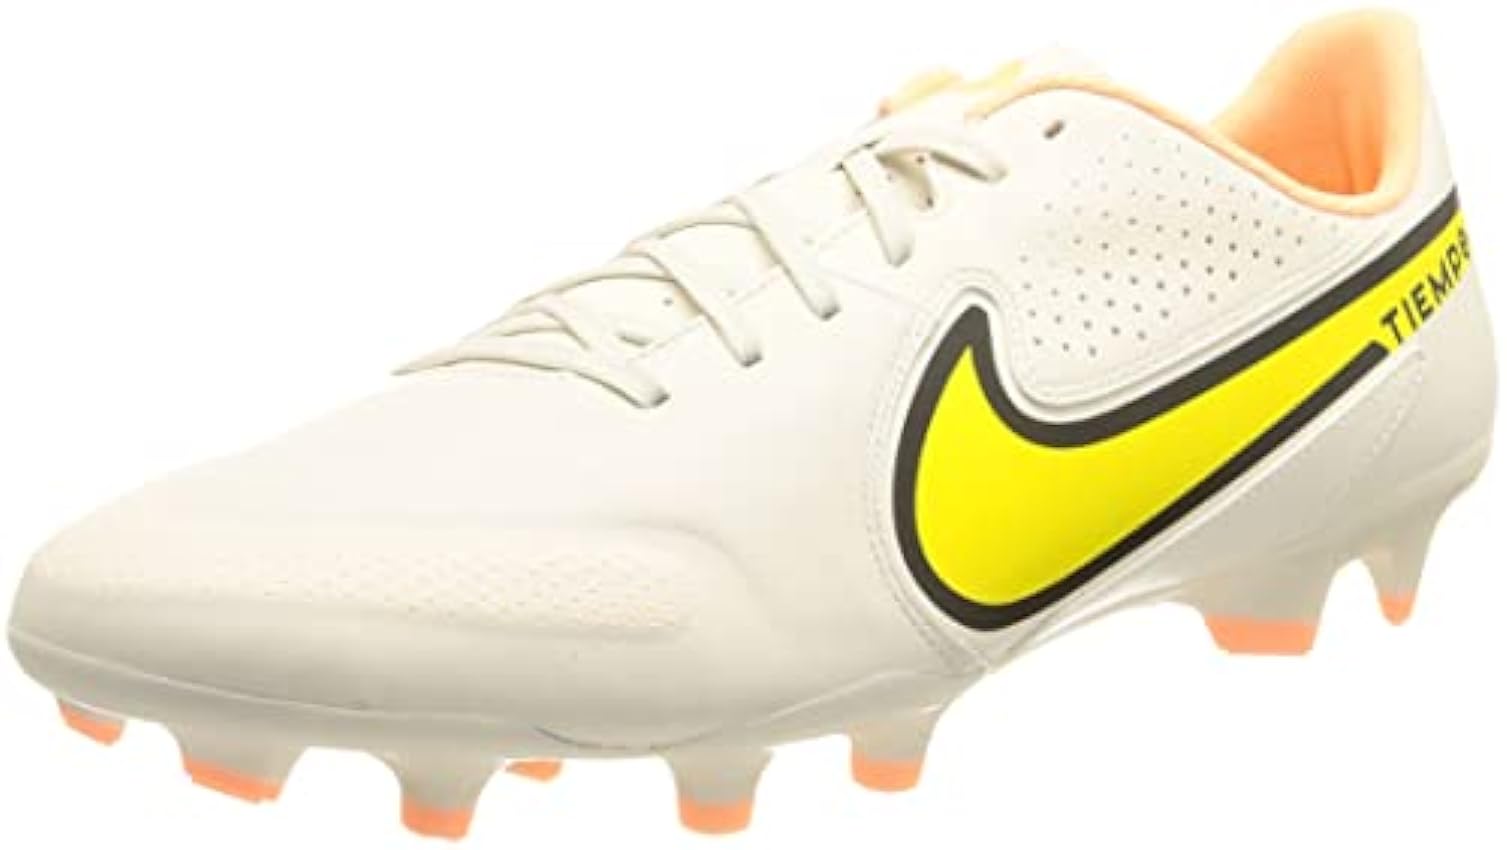 Nike Homme Tiempo Legend 9 Academy MG Multi-Ground Soccer Cleats a5dC27vA